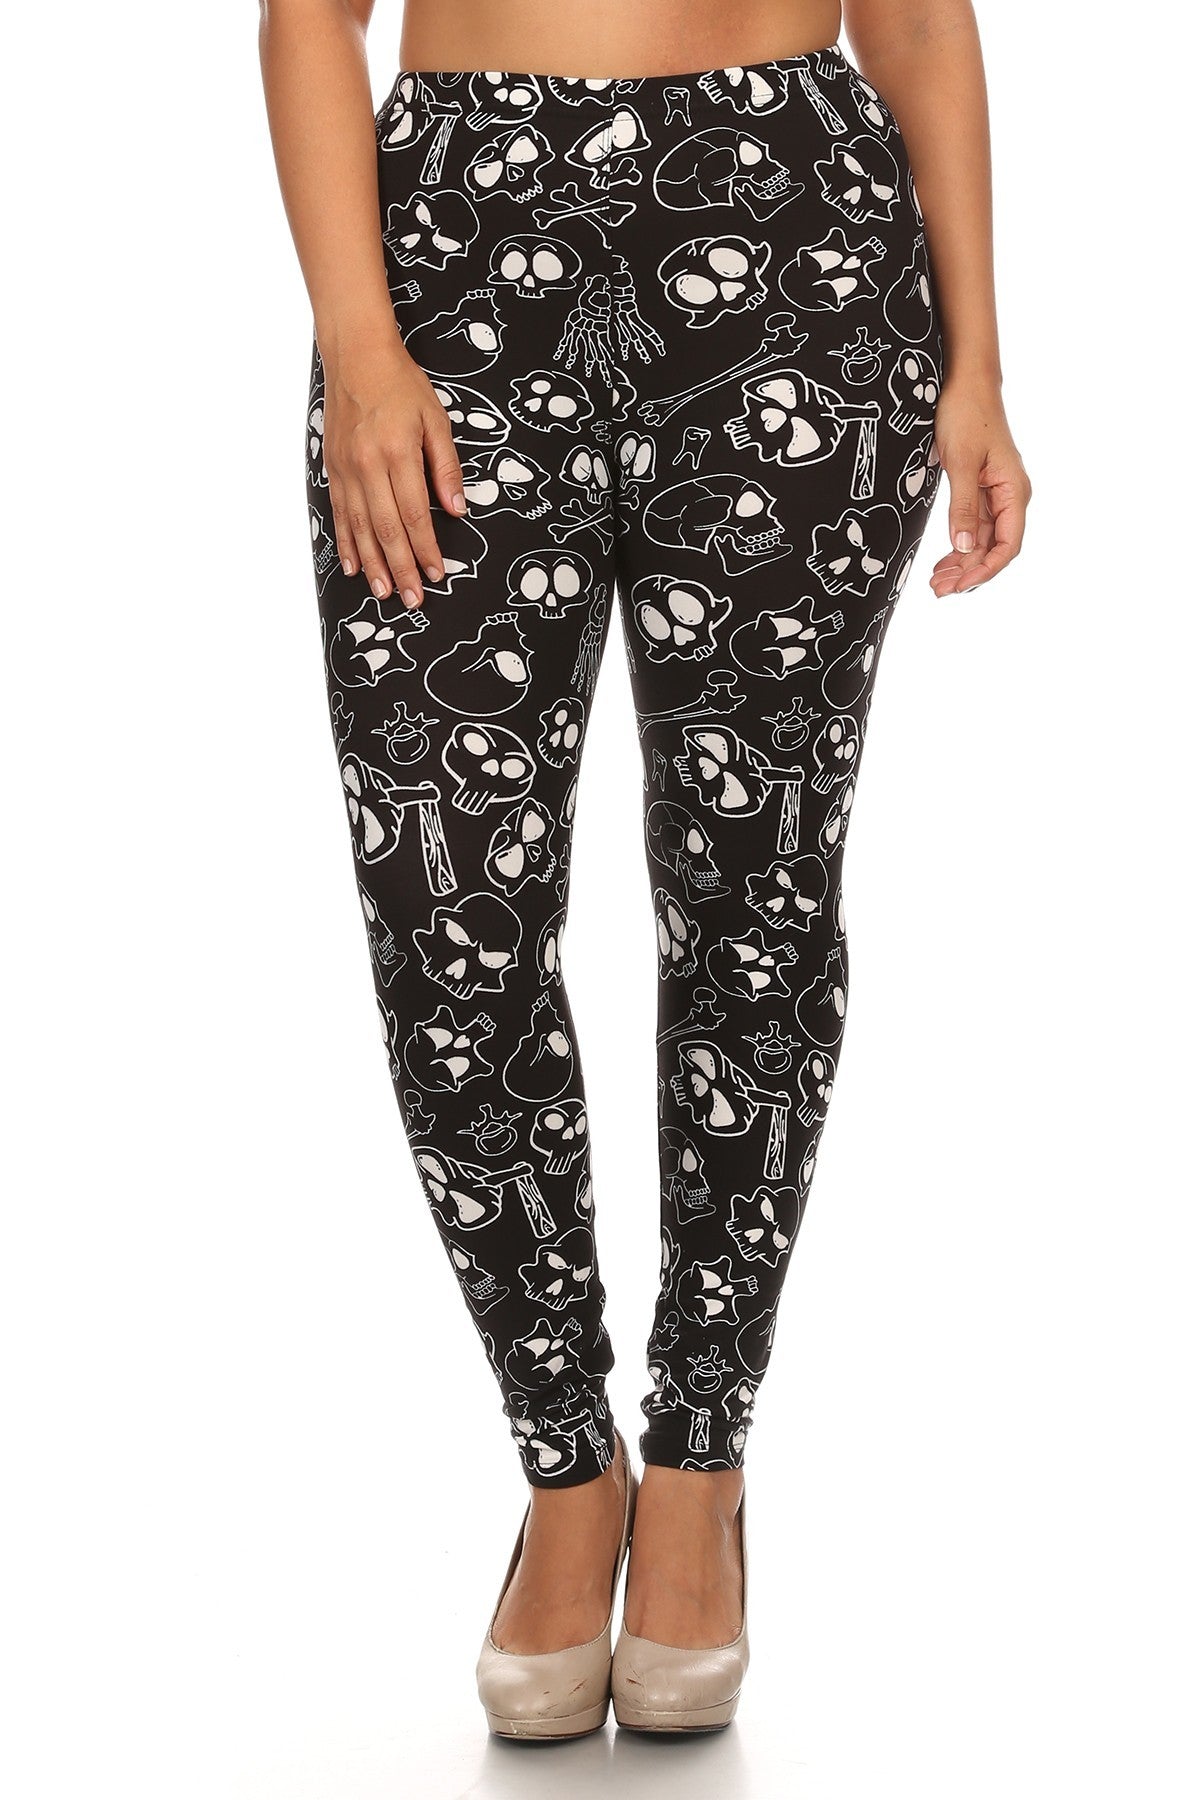 Plus Size Print, Full Length Leggings In A Fitted Style With A Banded High Waist Women's Clothing jehouze 